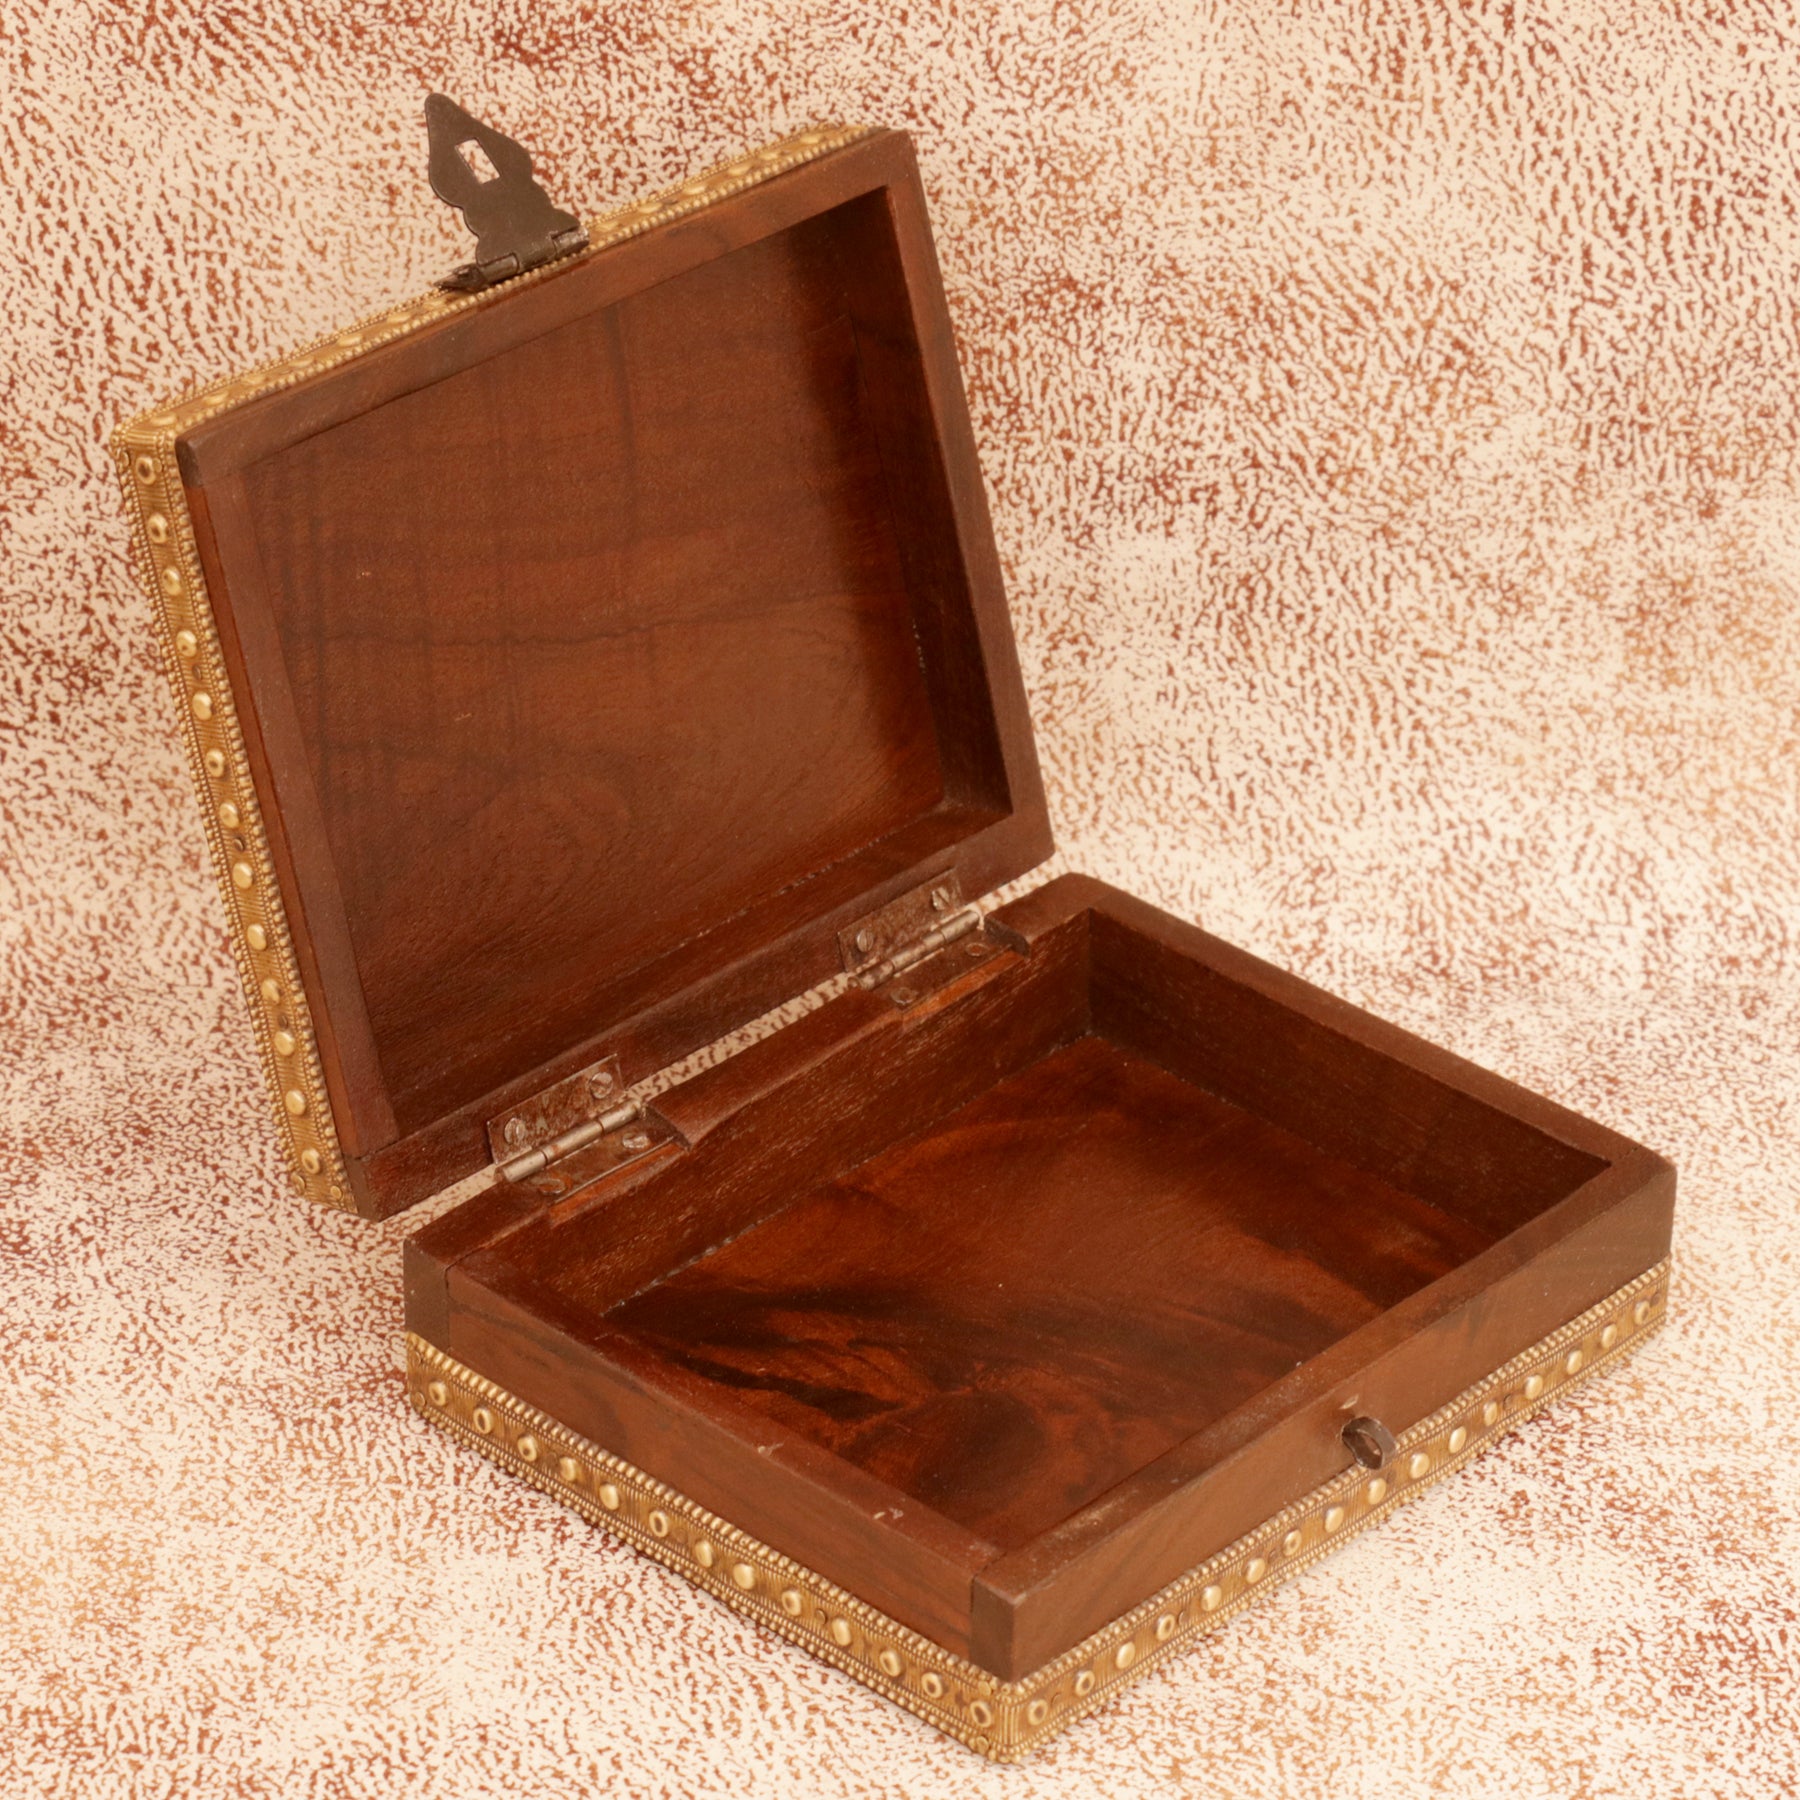 Wooden Classy Boxes Wooden Box